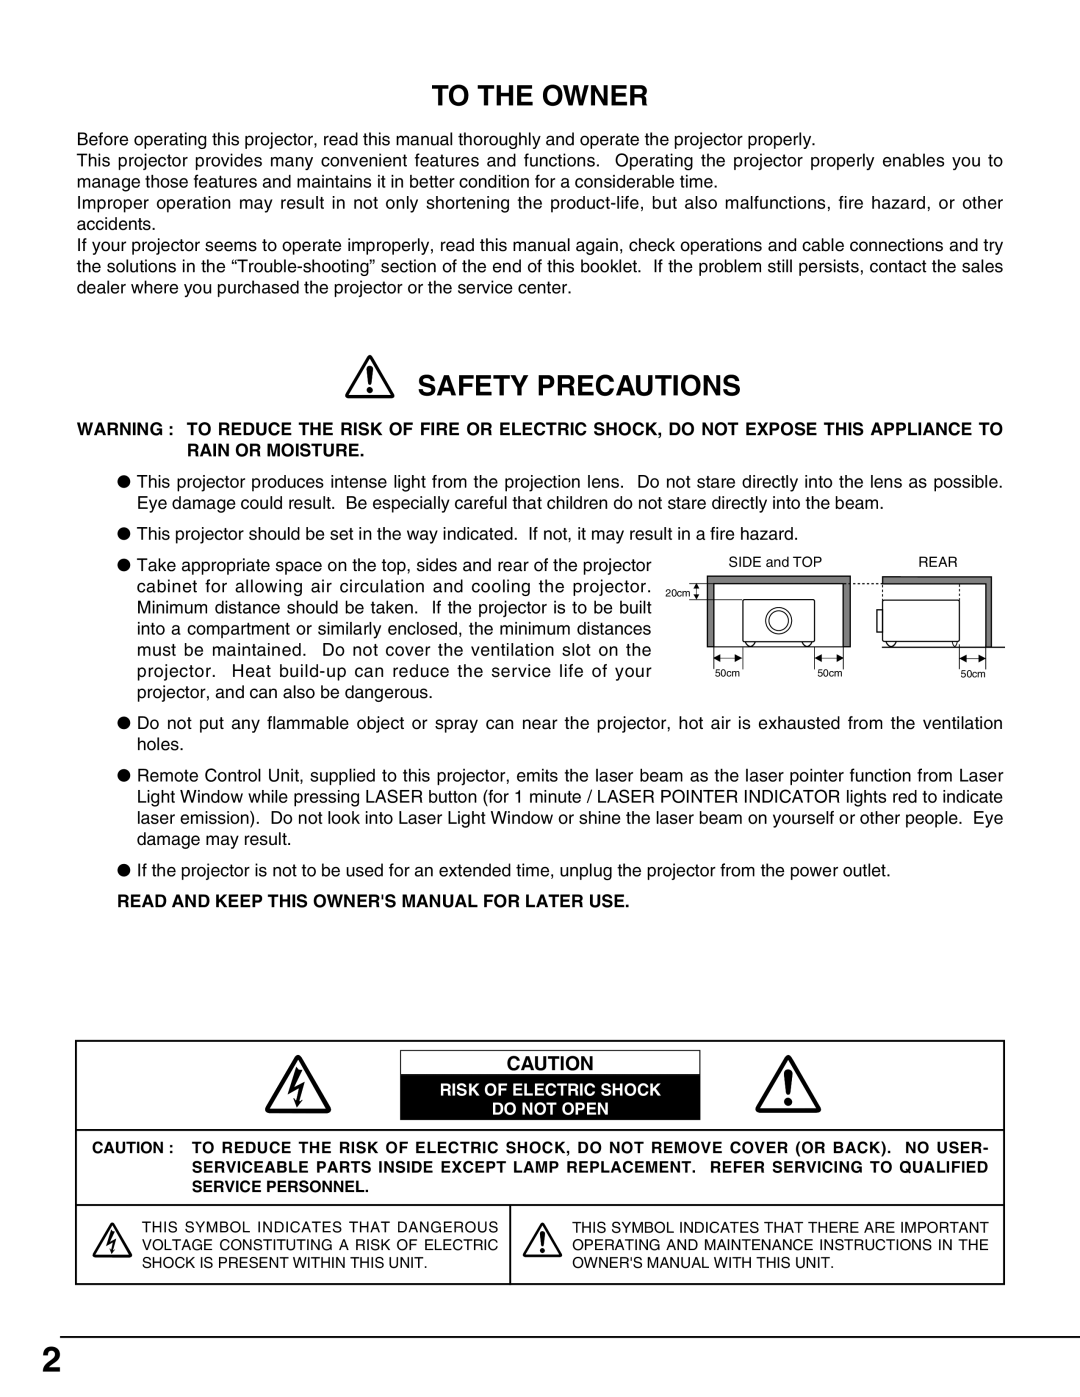 Sanyo PLC-XP55L owner manual To The Owner, Safety Precautions 